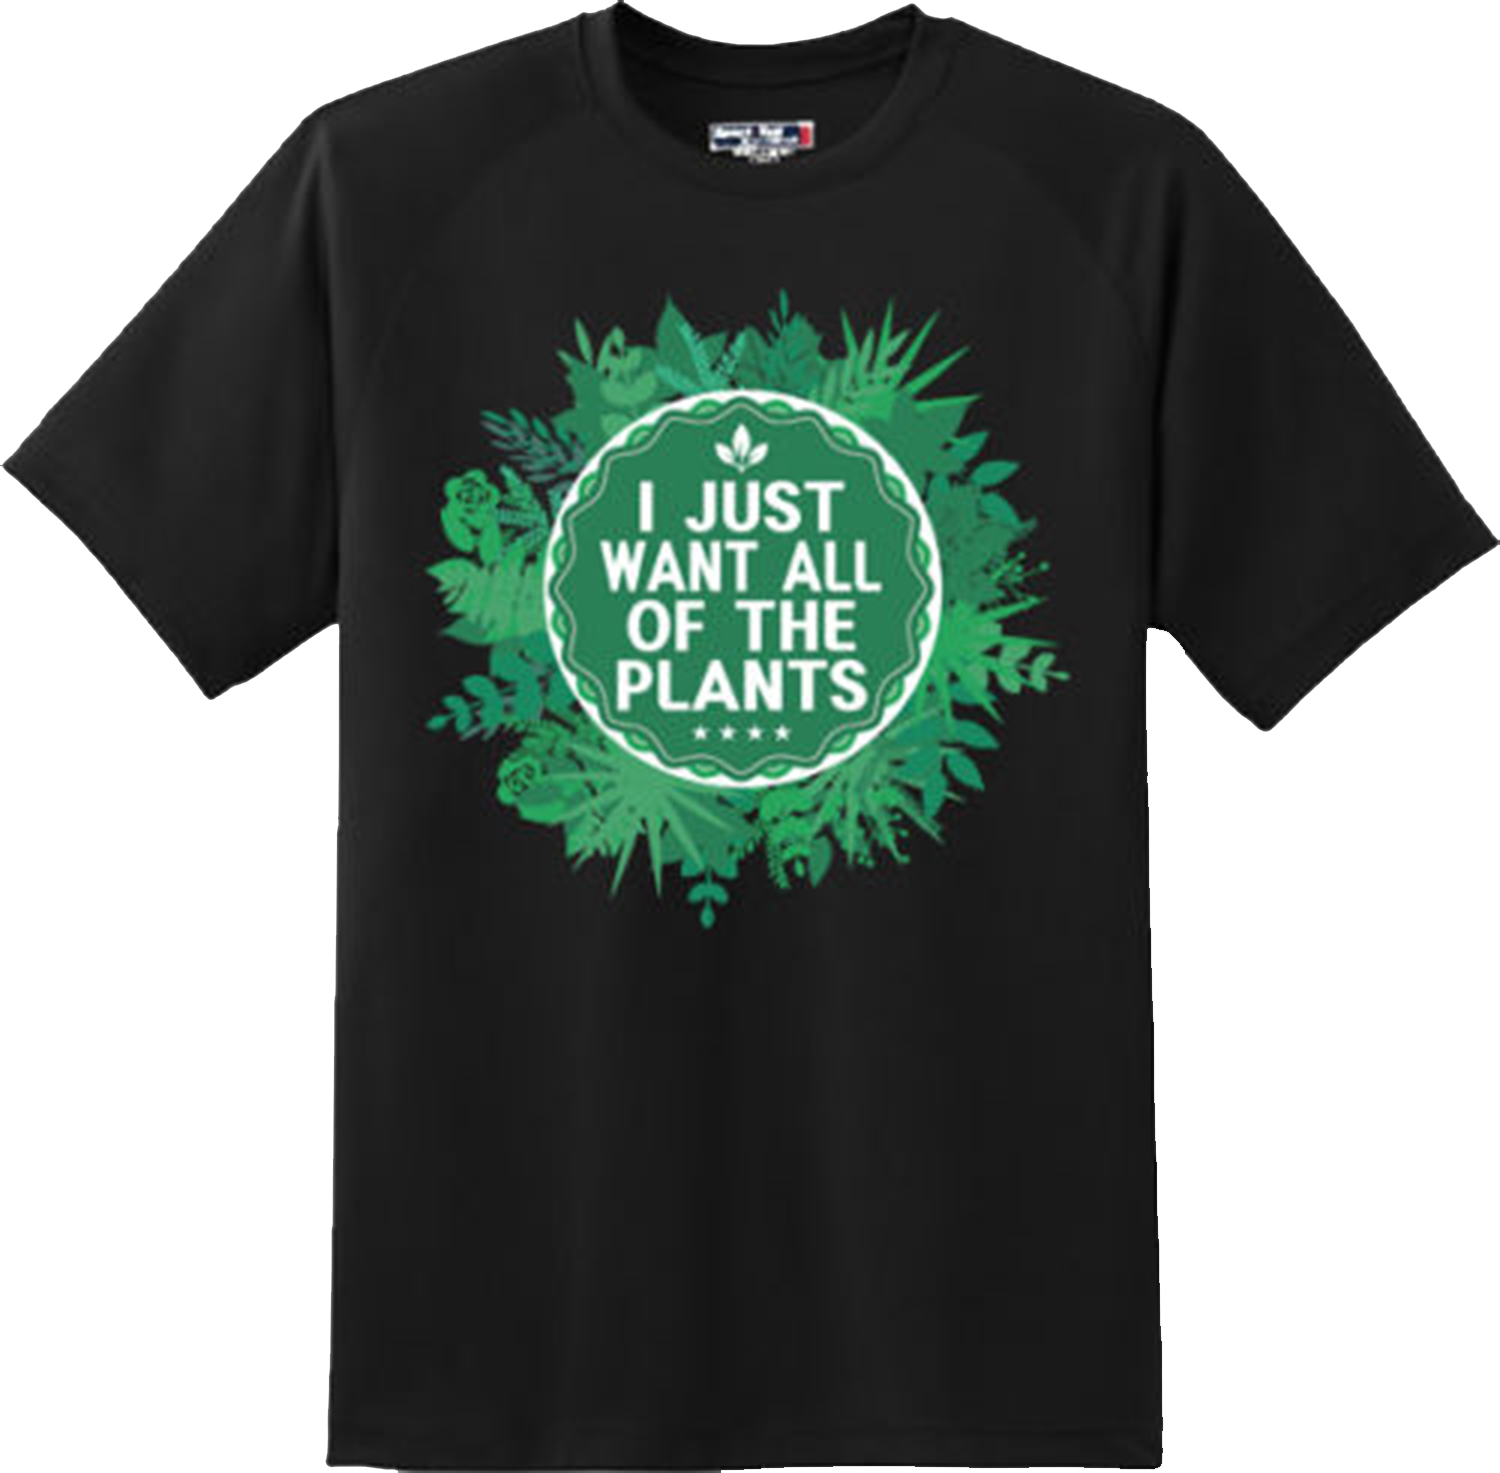 Funny Want All Plants Gardening T Shirt New Graphic Tee